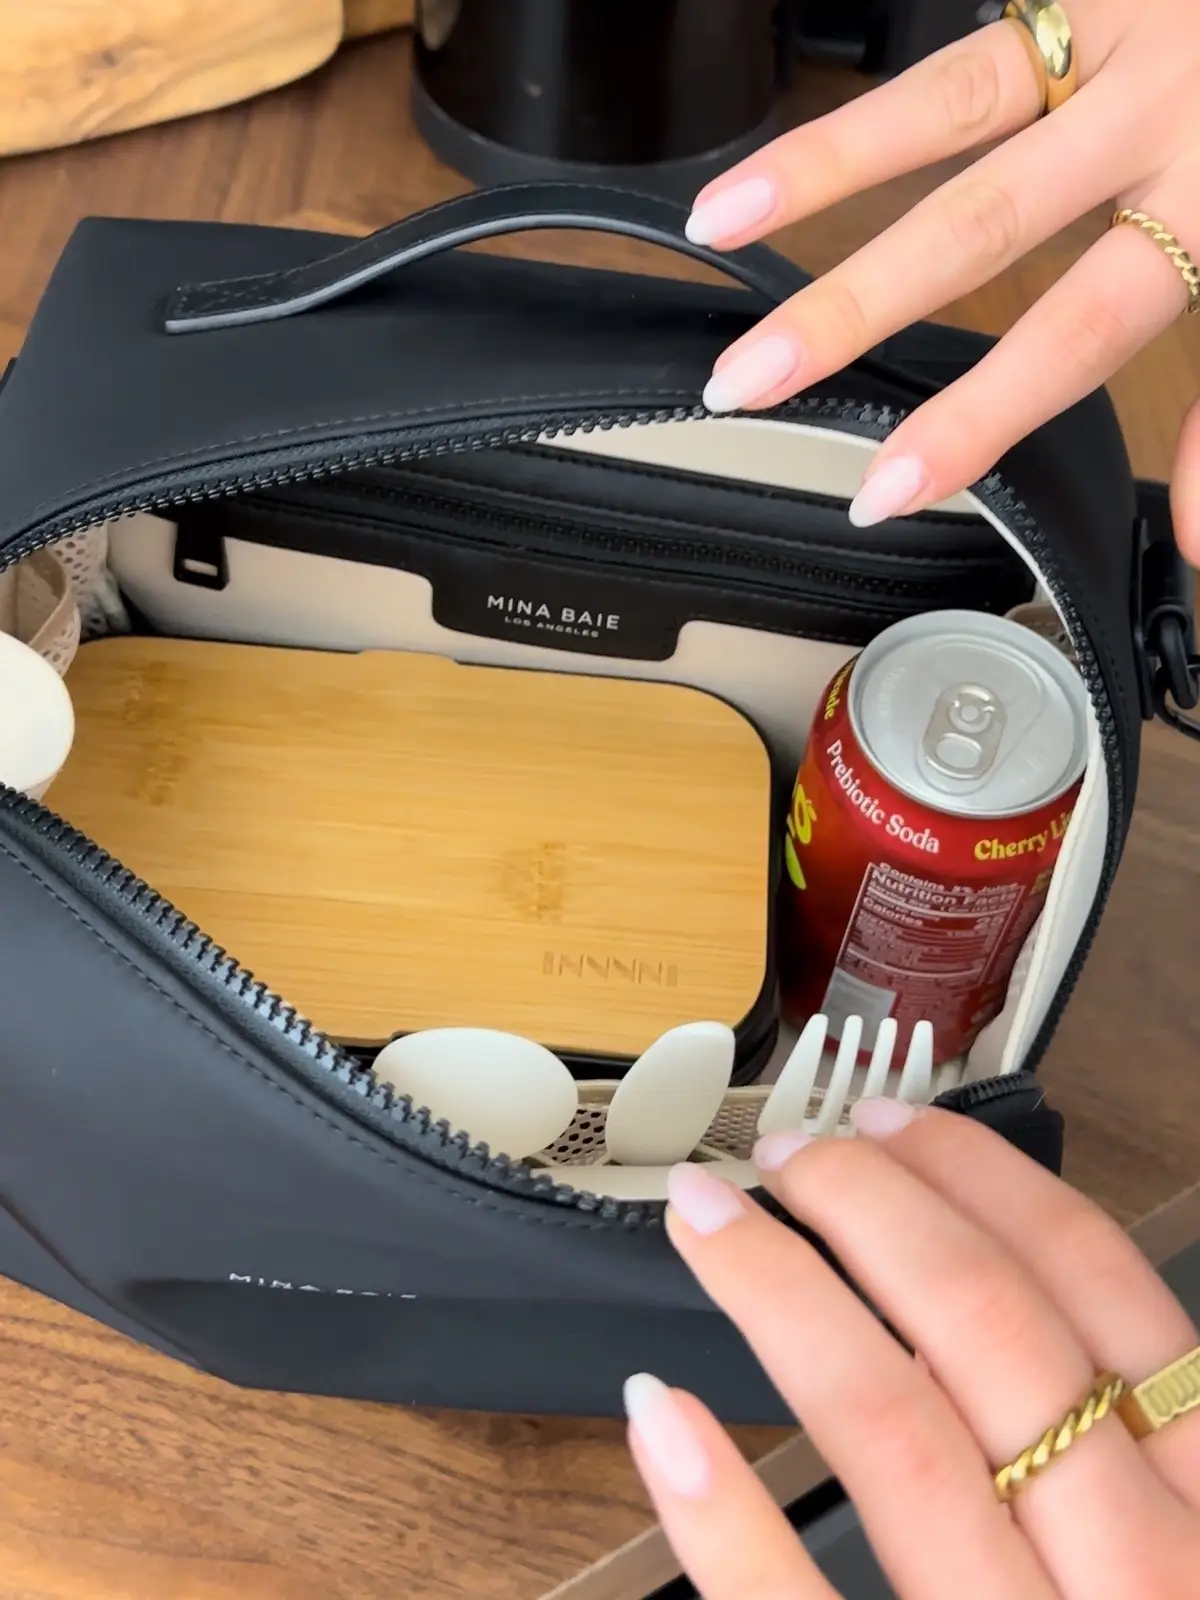 To be packed in a beautiful bag Luca lunch bag. Lined with neoprene to keep food & drinks nice and cool. Designated loops for utensils and a minimal, chic design that youll proudly take to the office! #lunchbag #lunchbox #lunchtime #fyp #virall 